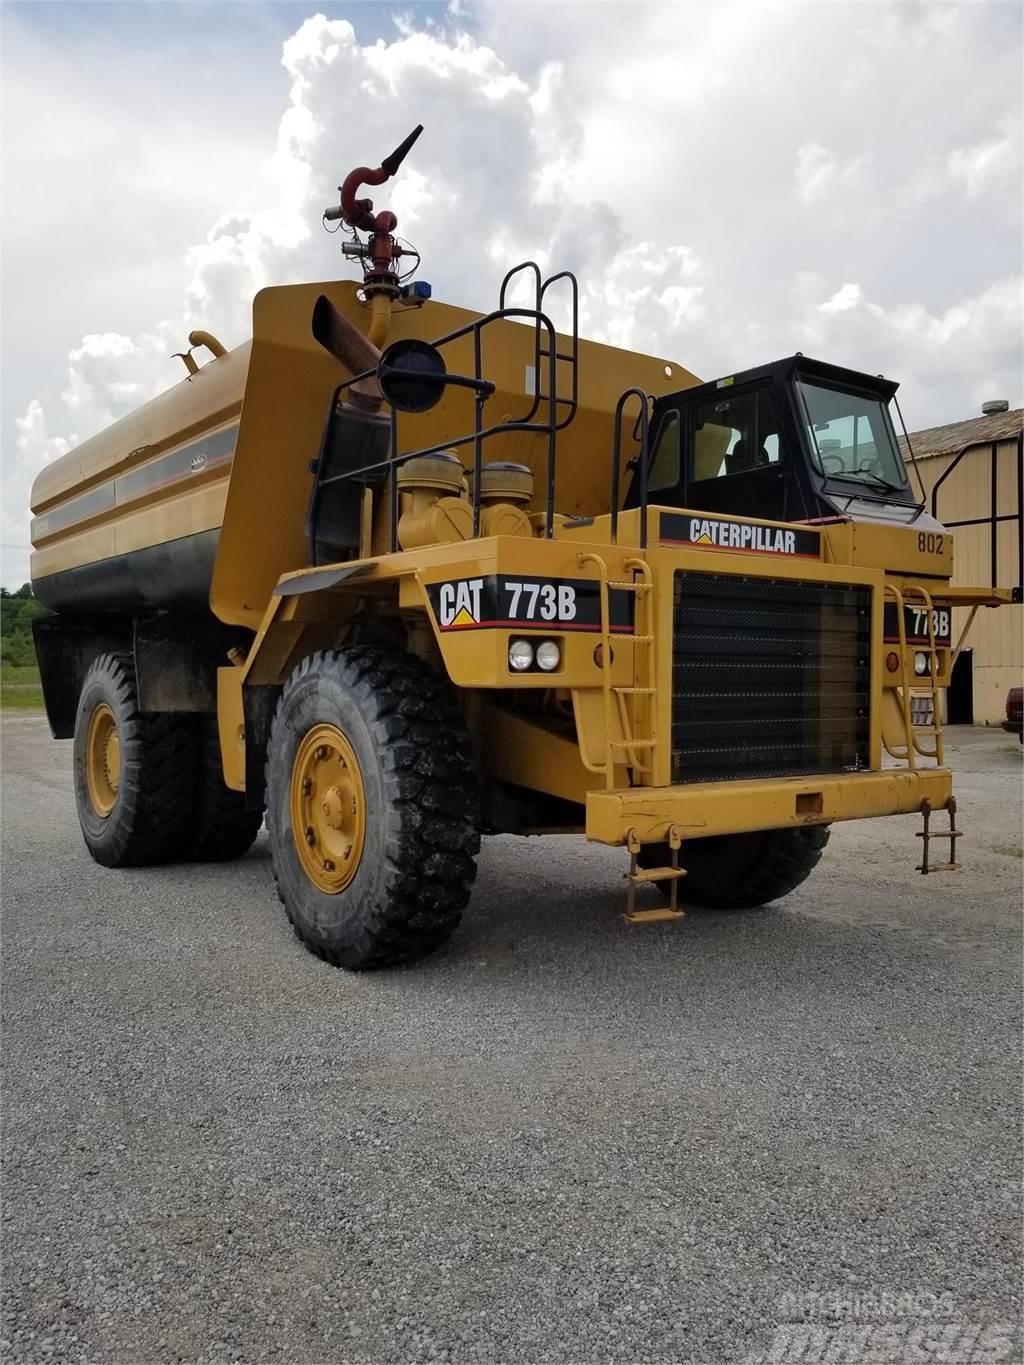 CAT 773B Water bowser